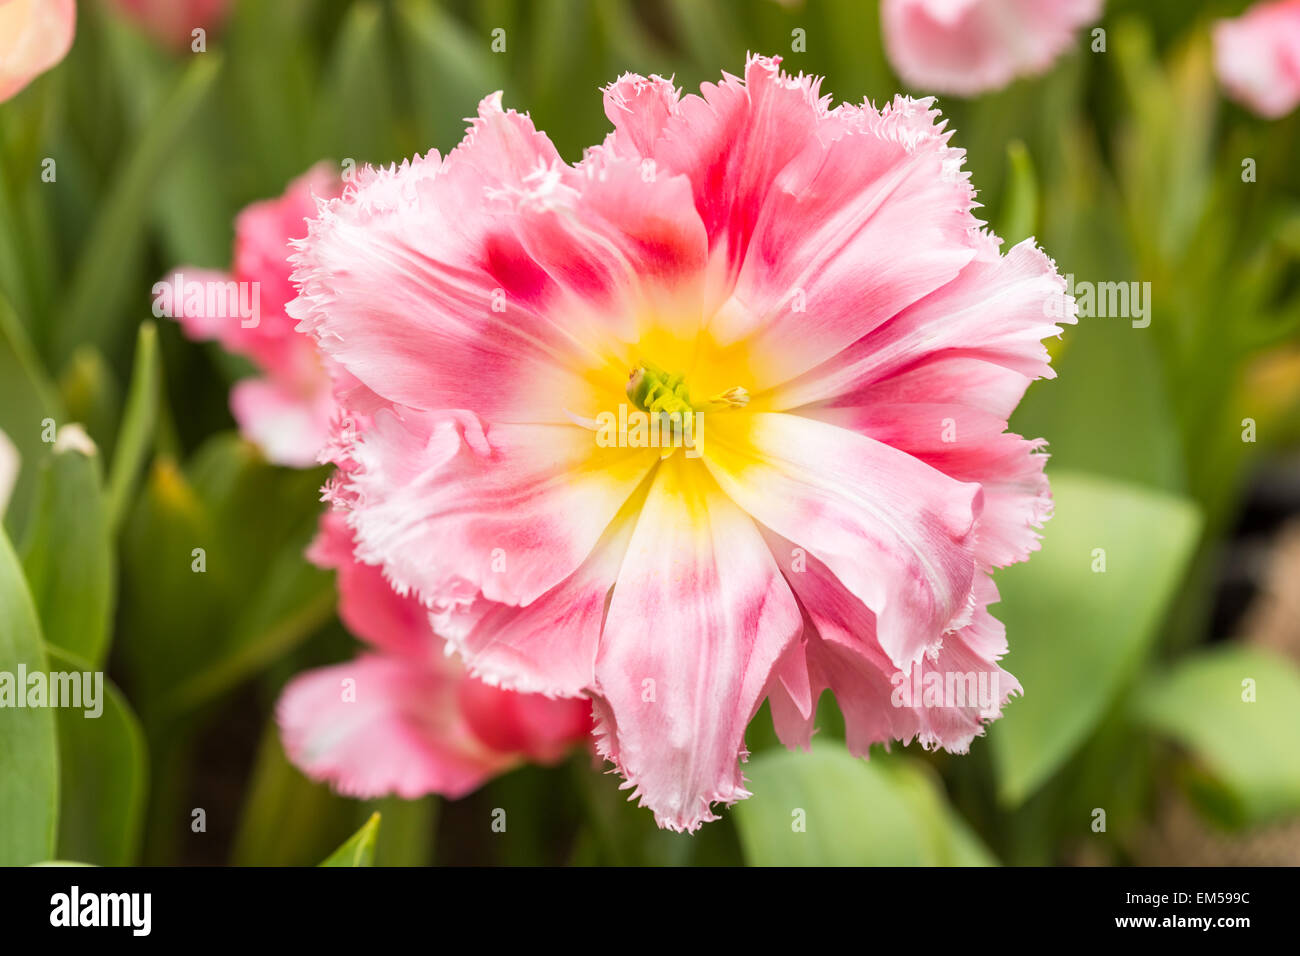 Close up of Pink tulips in the spring garden. Shallow DOF. Stock Photo